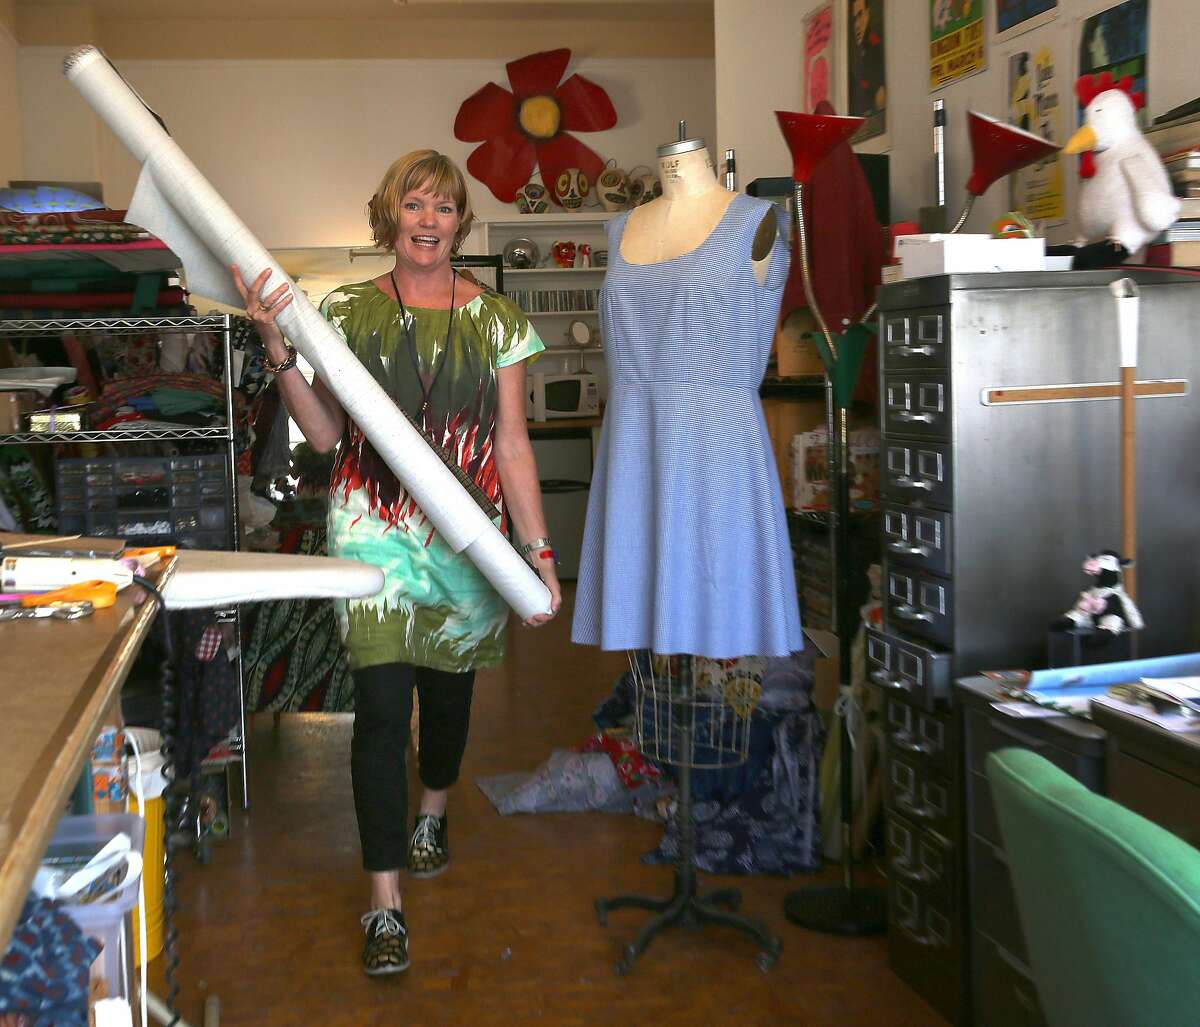 Clothing designer Dema Grim in her downtown studio on Tuesday, September 13, 2016, in San Francisco, Calif.